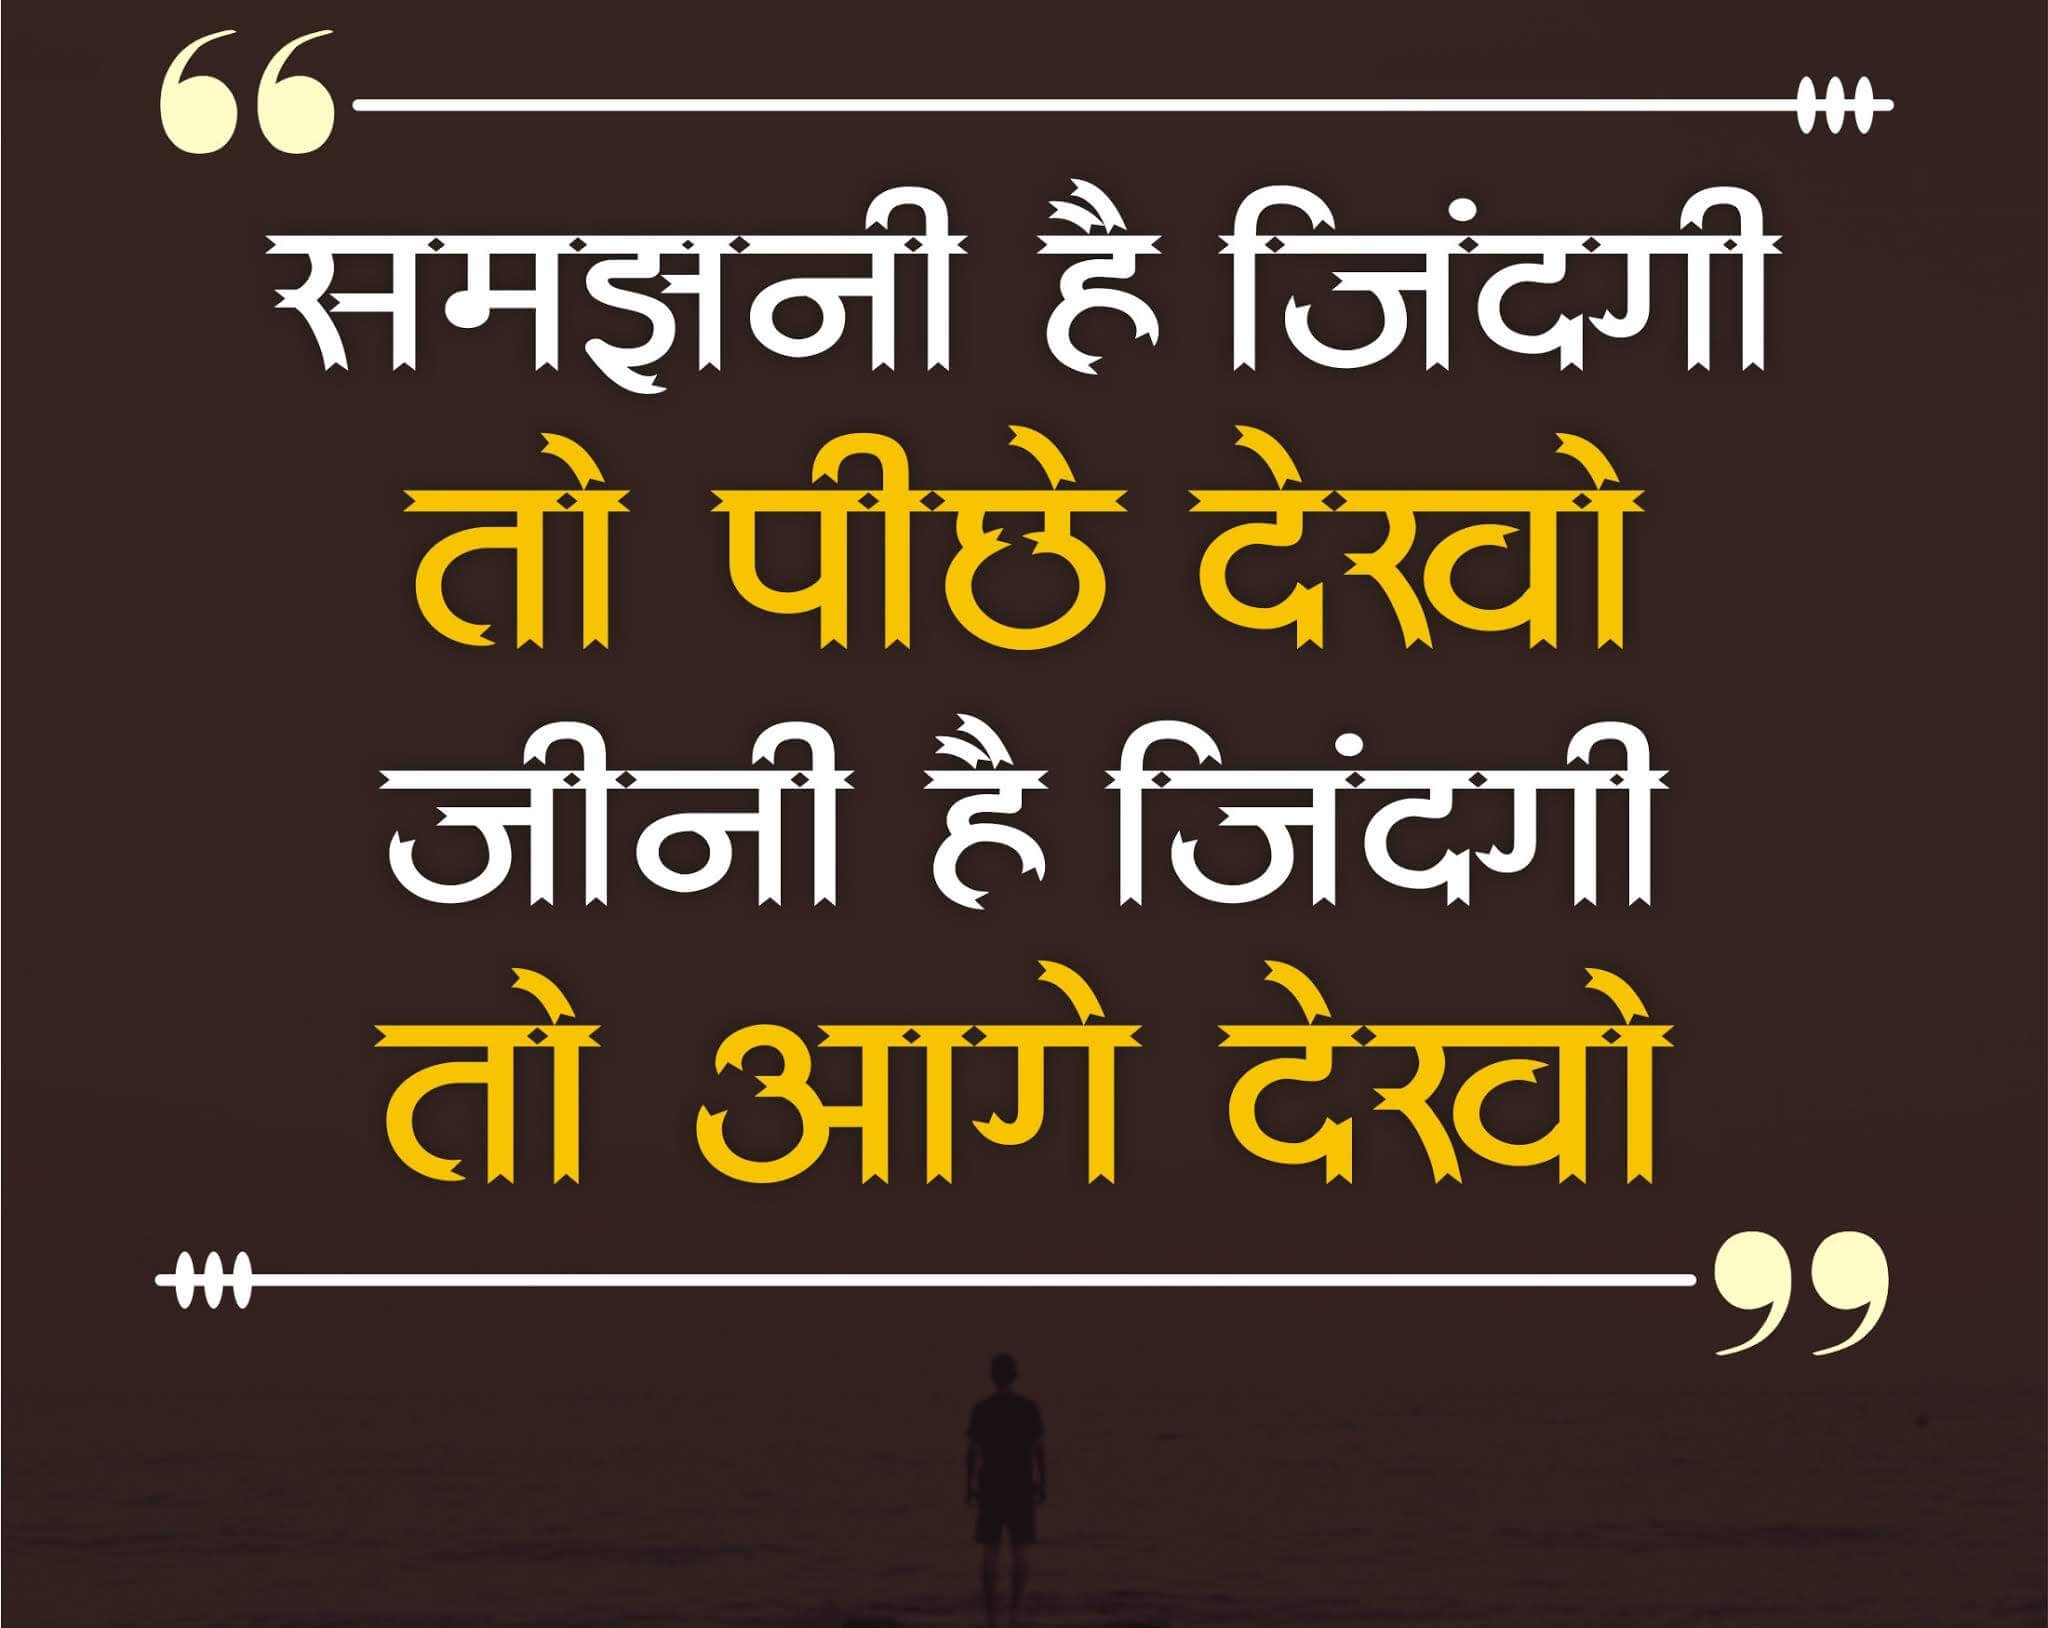 110 Hindi Motivational Quotes and Thoughts हिन्दी मोटिवेशनल क्वोट्स और